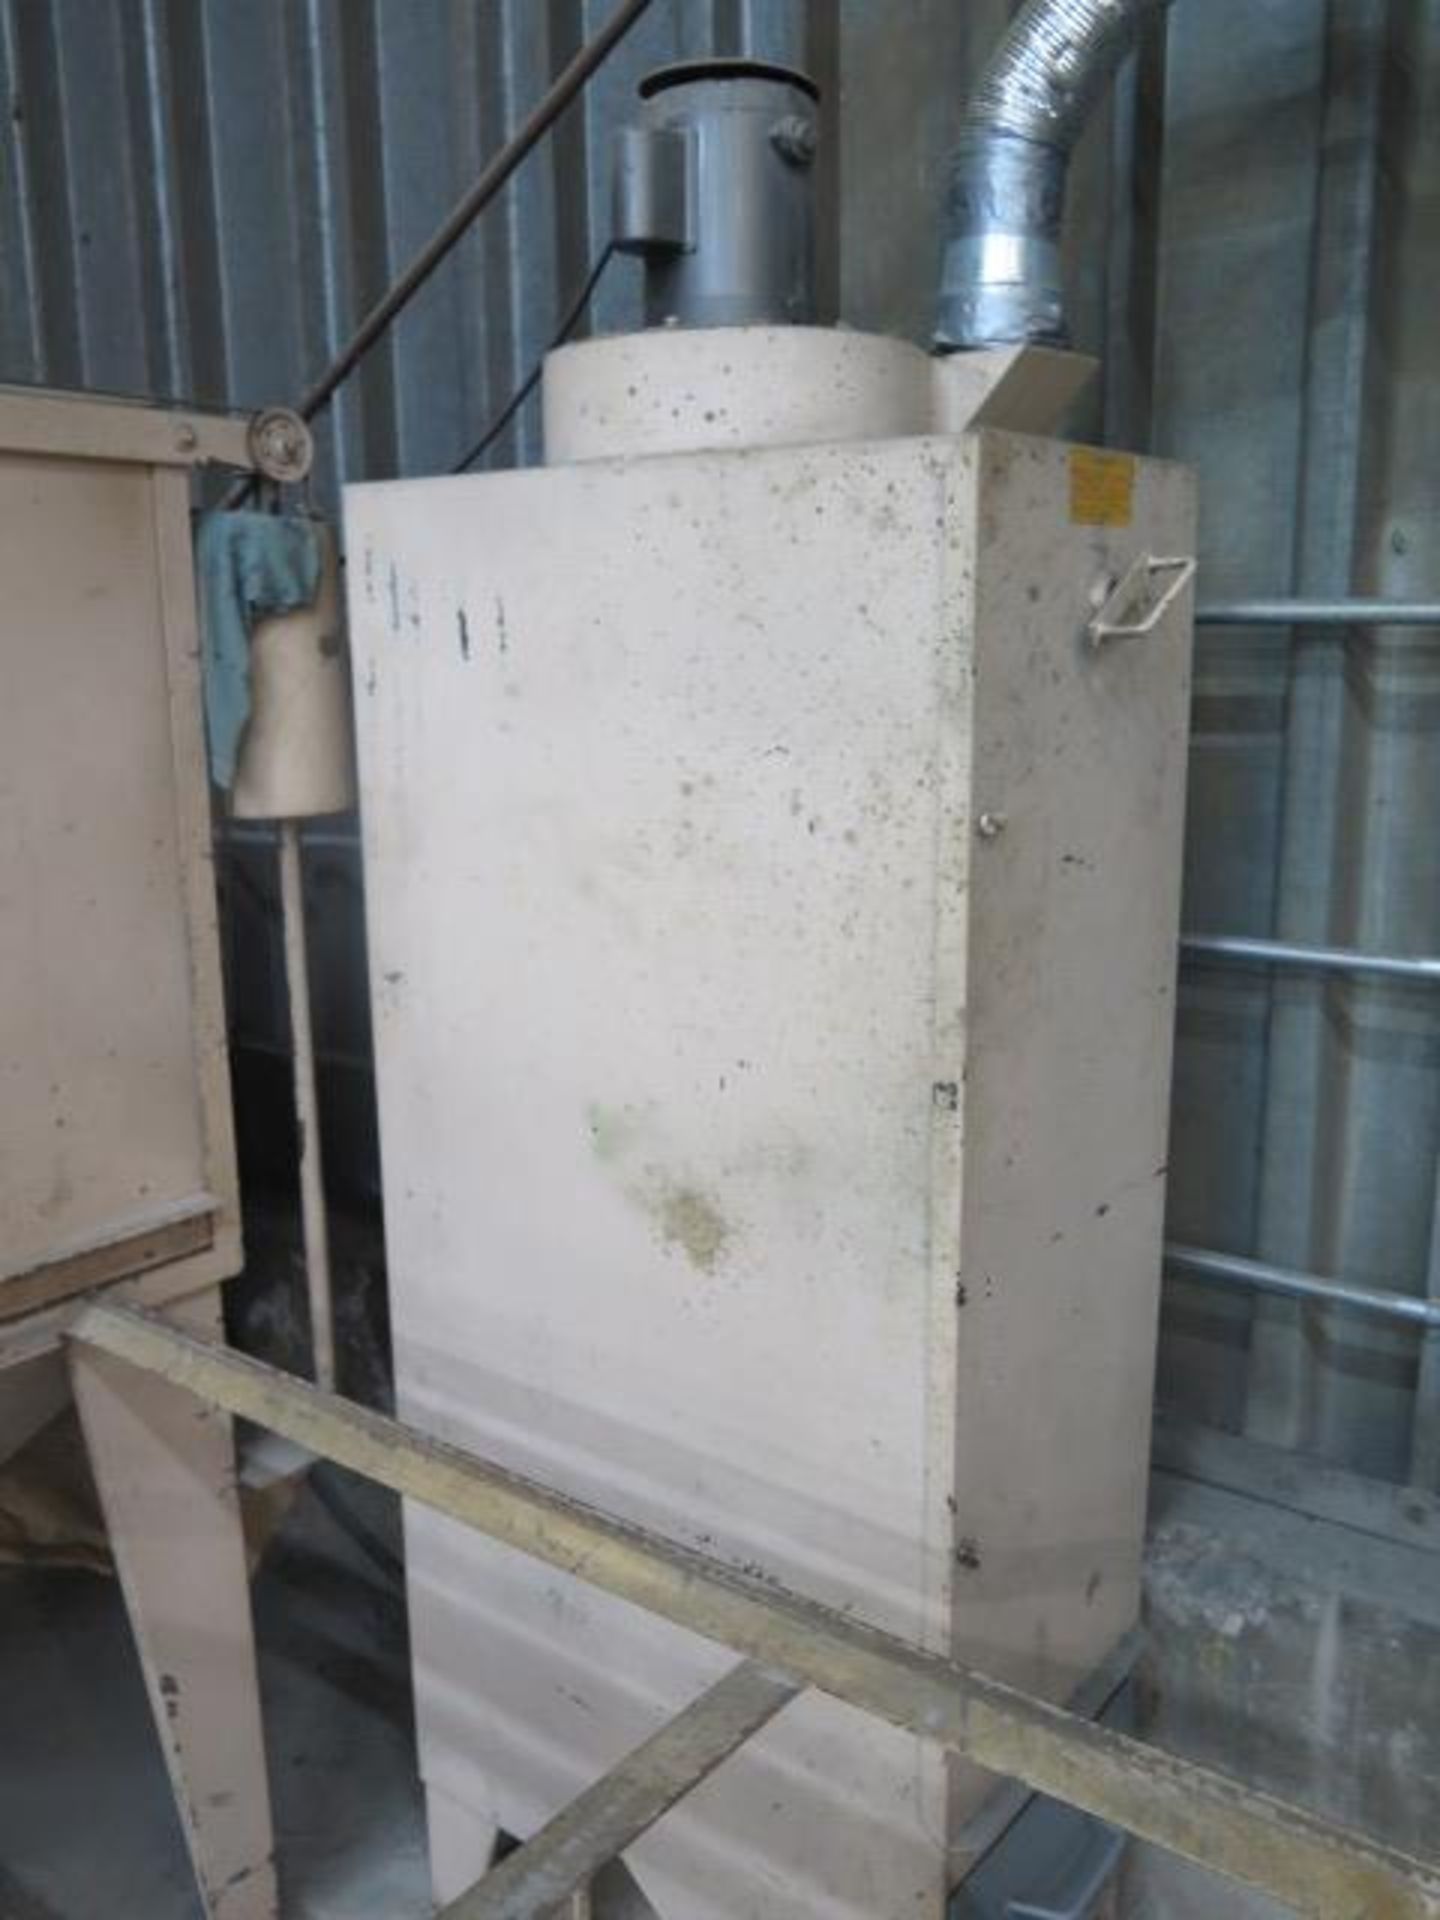 Universal Abrasive Blast Dry Blast Cabinet w/ Dust Collector (SOLD AS-IS - NO WARRANTY) - Image 6 of 7